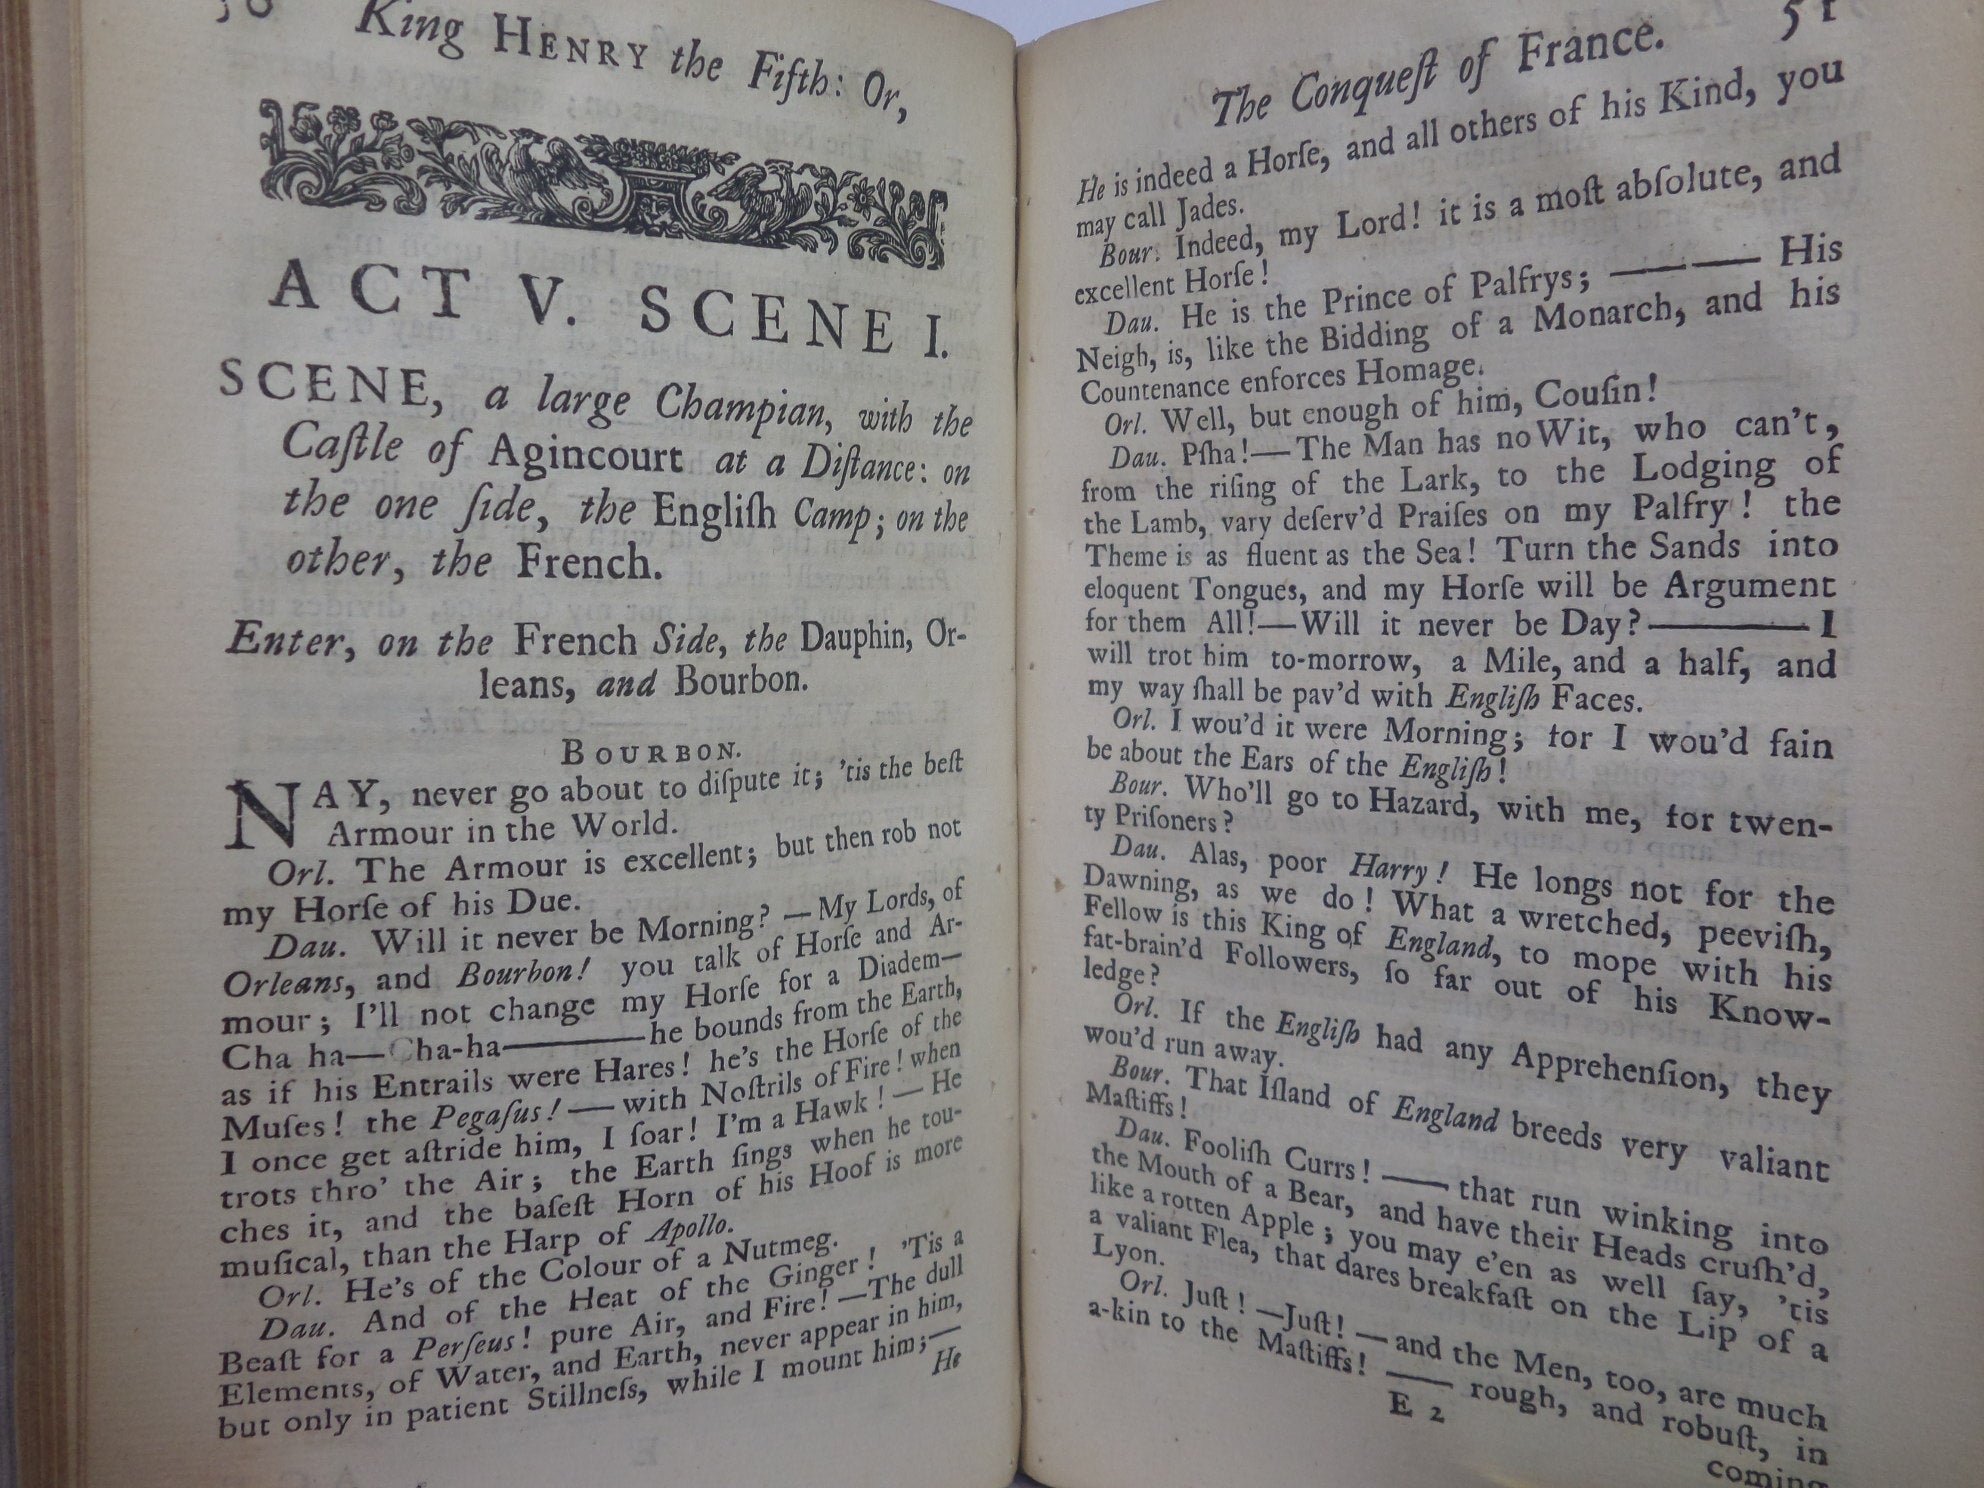 KING HENRY THE FIFTH BY AARON HILL 1723 ADAPTED FROM WILLIAM SHAKESPEARE